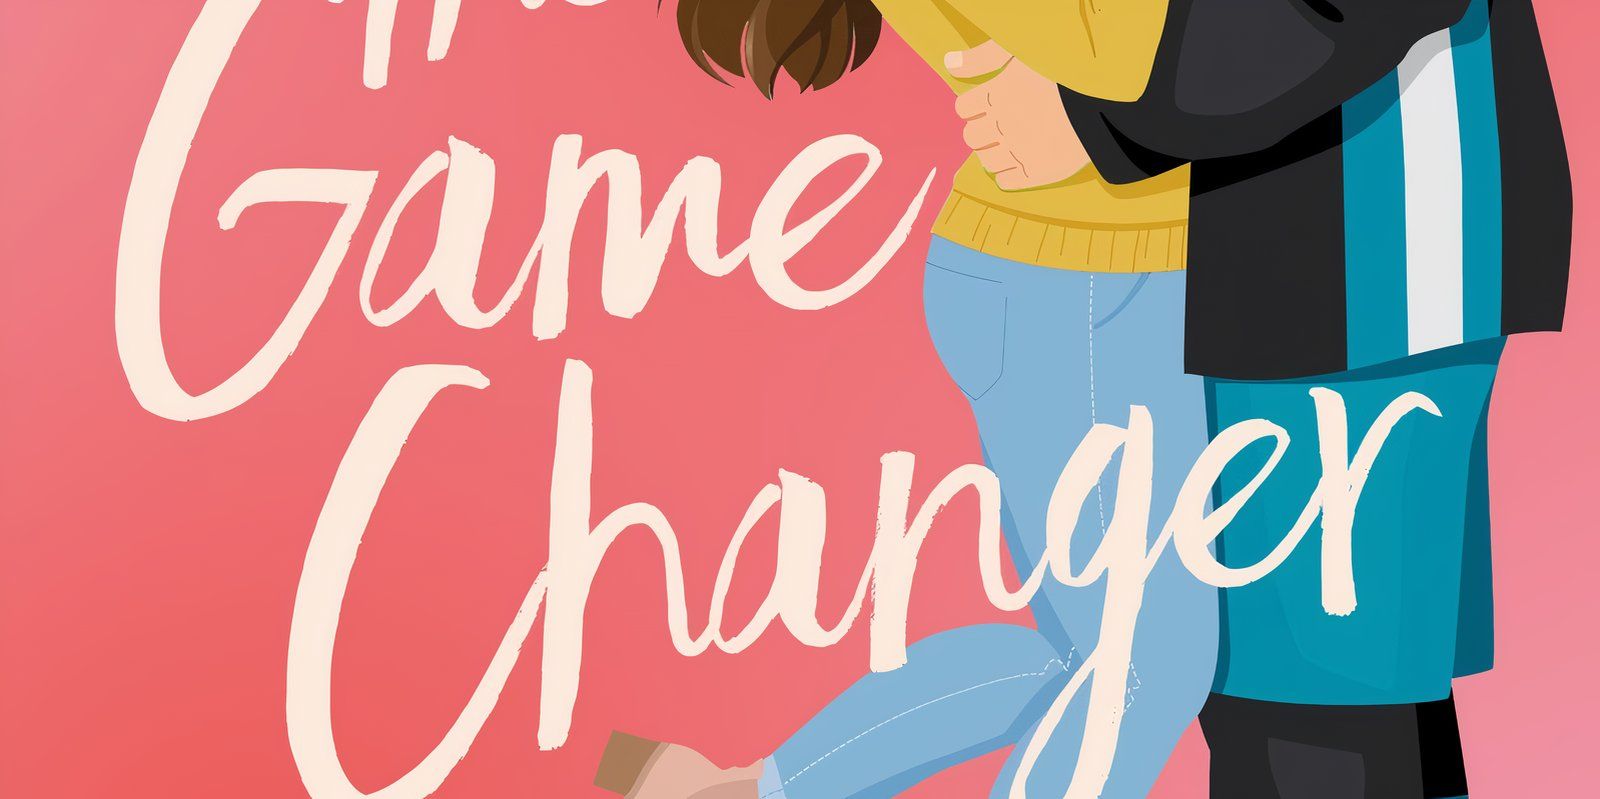 The cover of The Game Changer